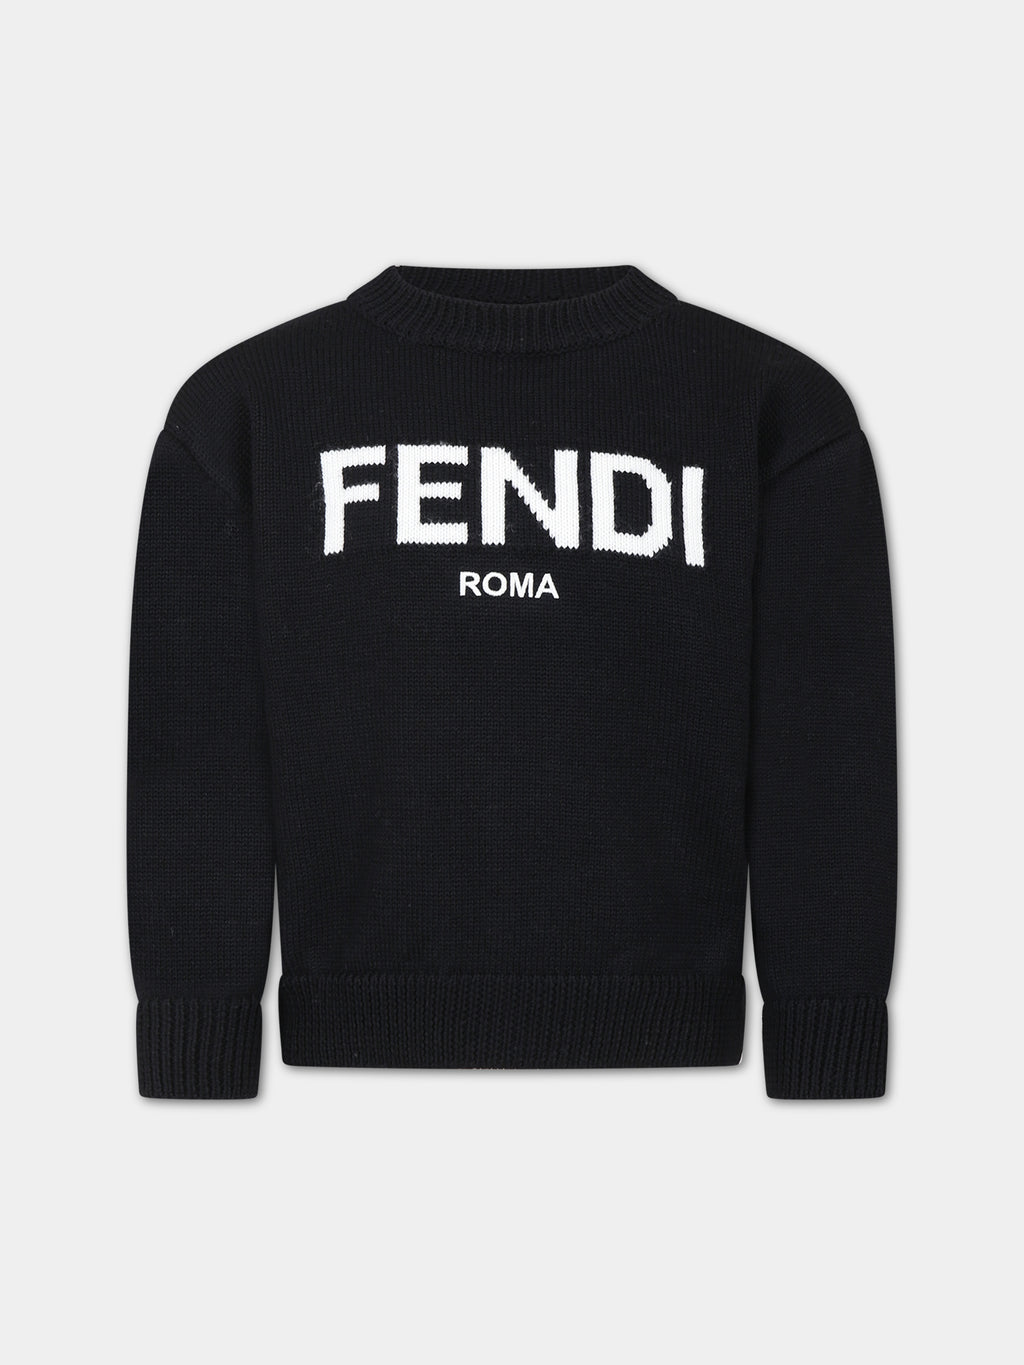 Black sweater with logo for kids